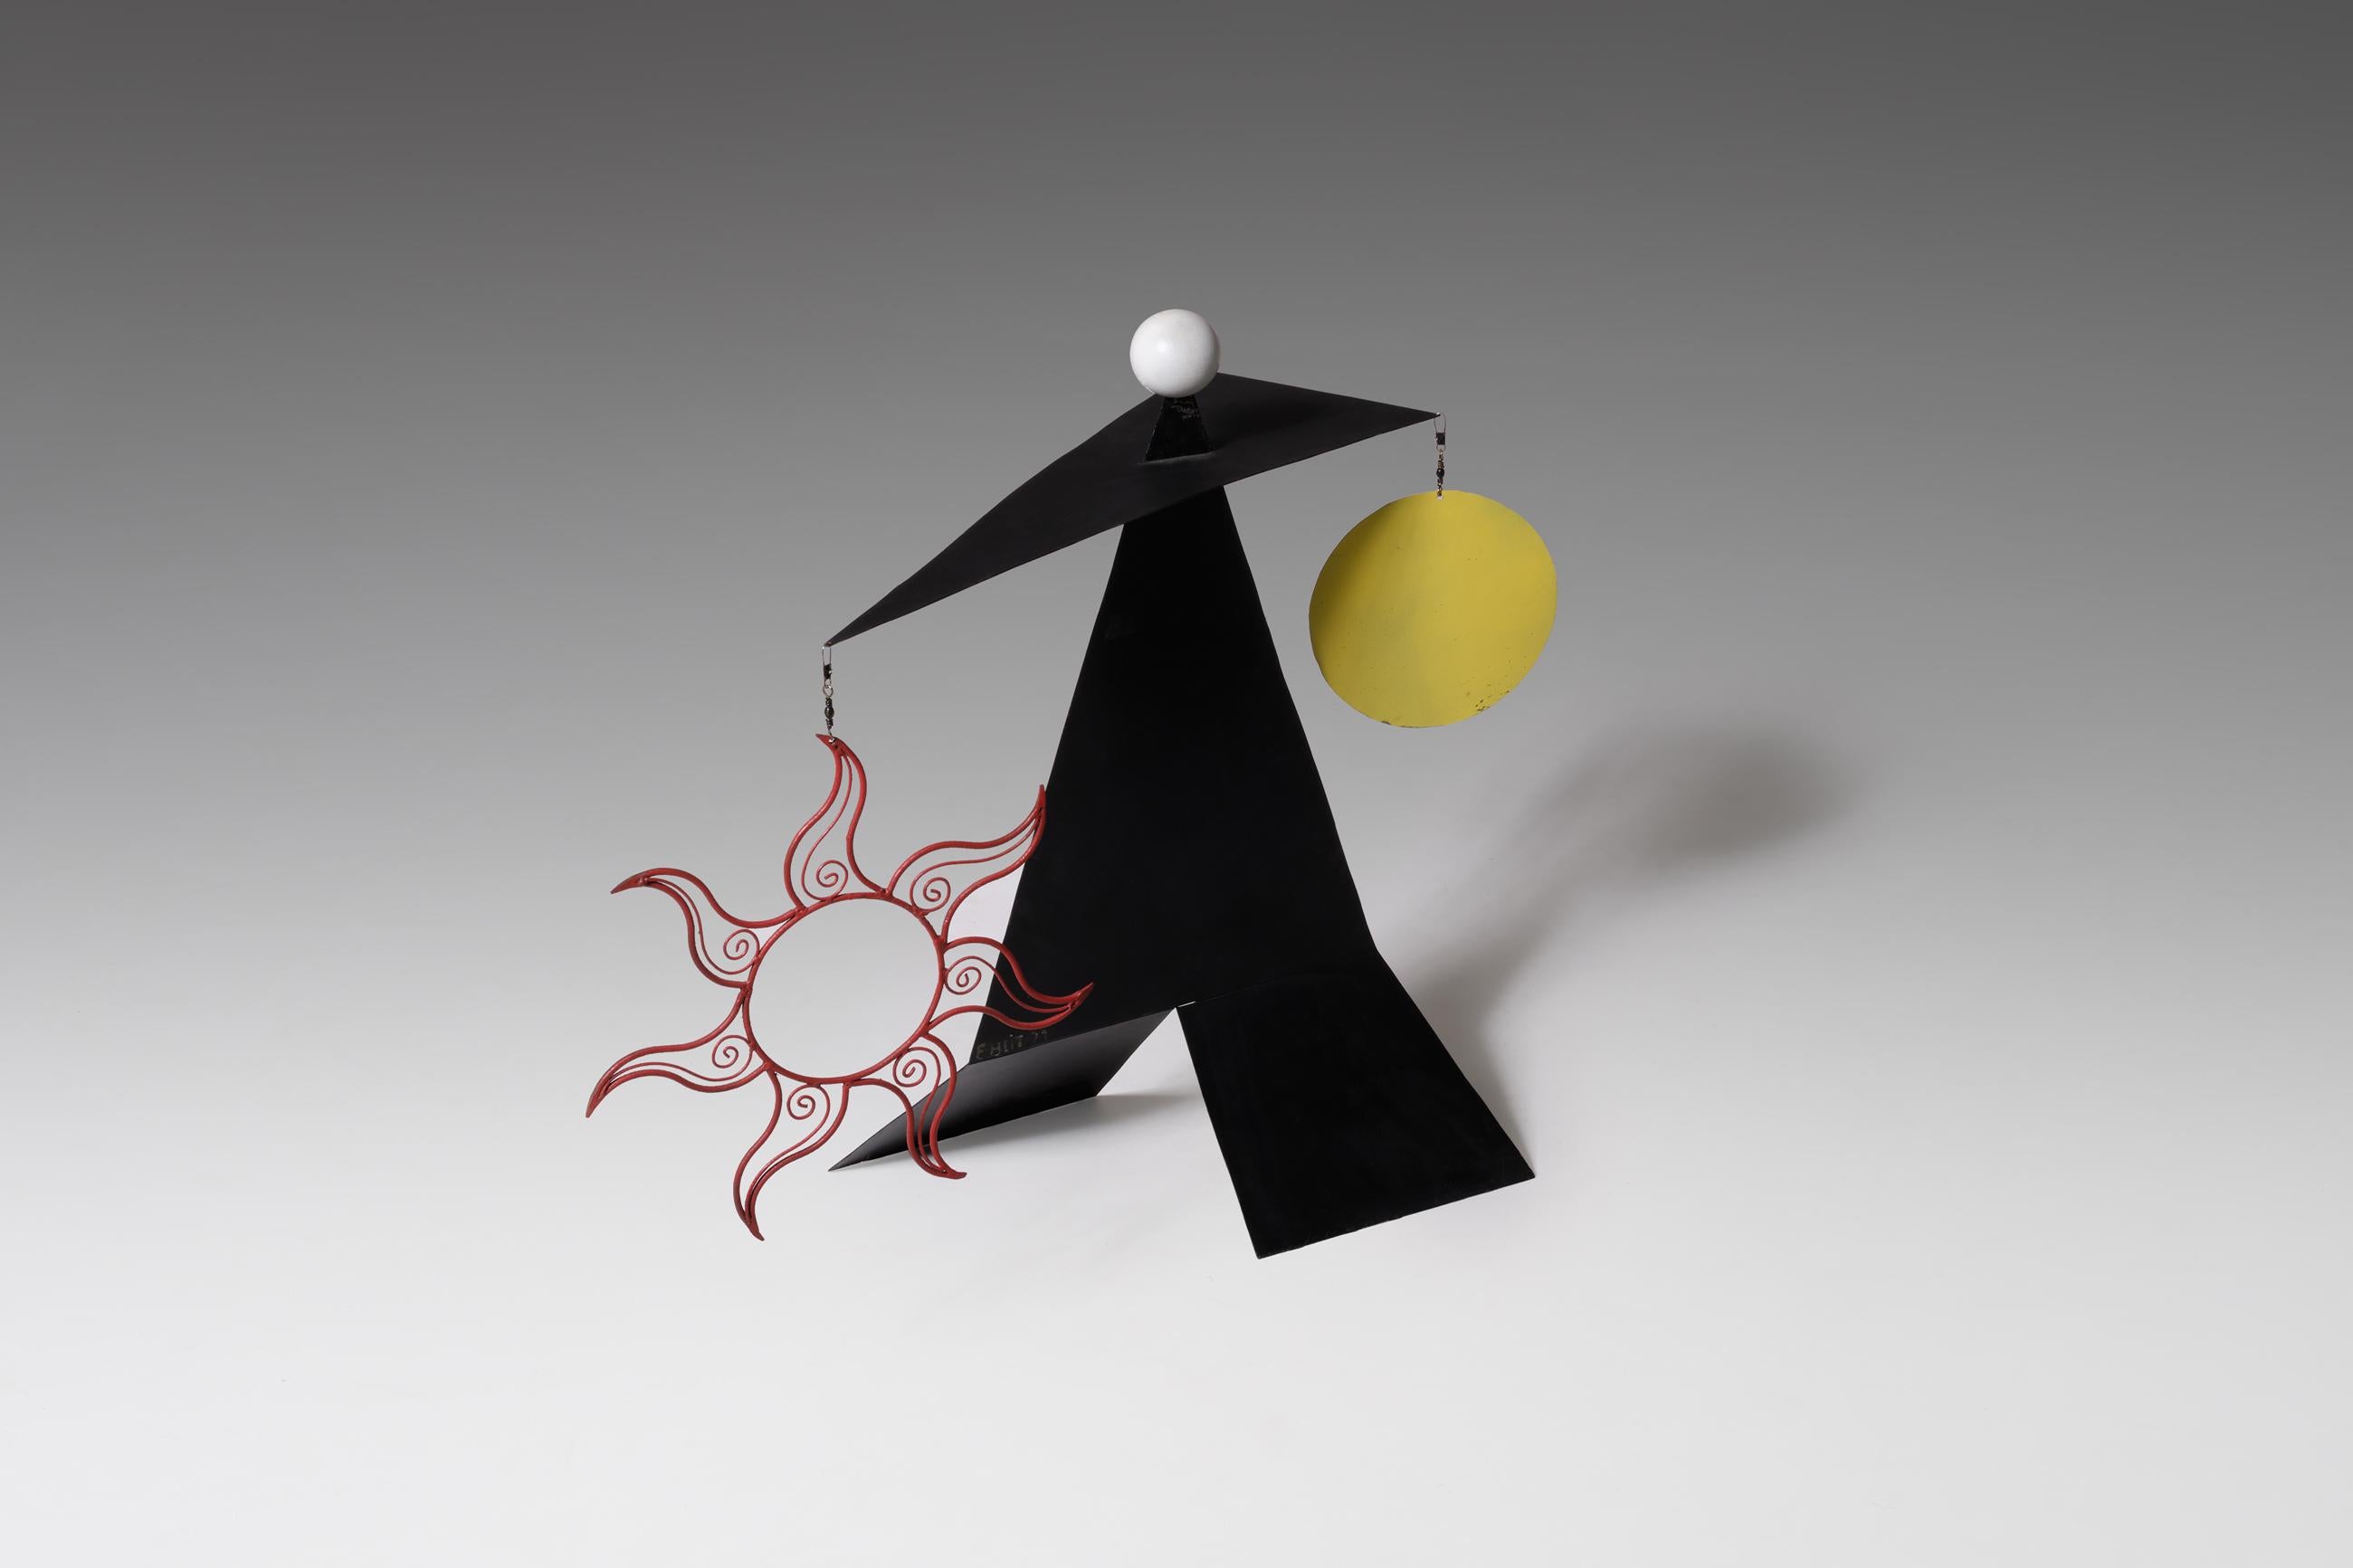 Mobile sculpture form France, 1971, made from sheet metal which is cutout in serval interesting shaped and painted in primary colors. On top rest a white lacquered wooden ball. The combination of colors, material shapes creating an interesting and